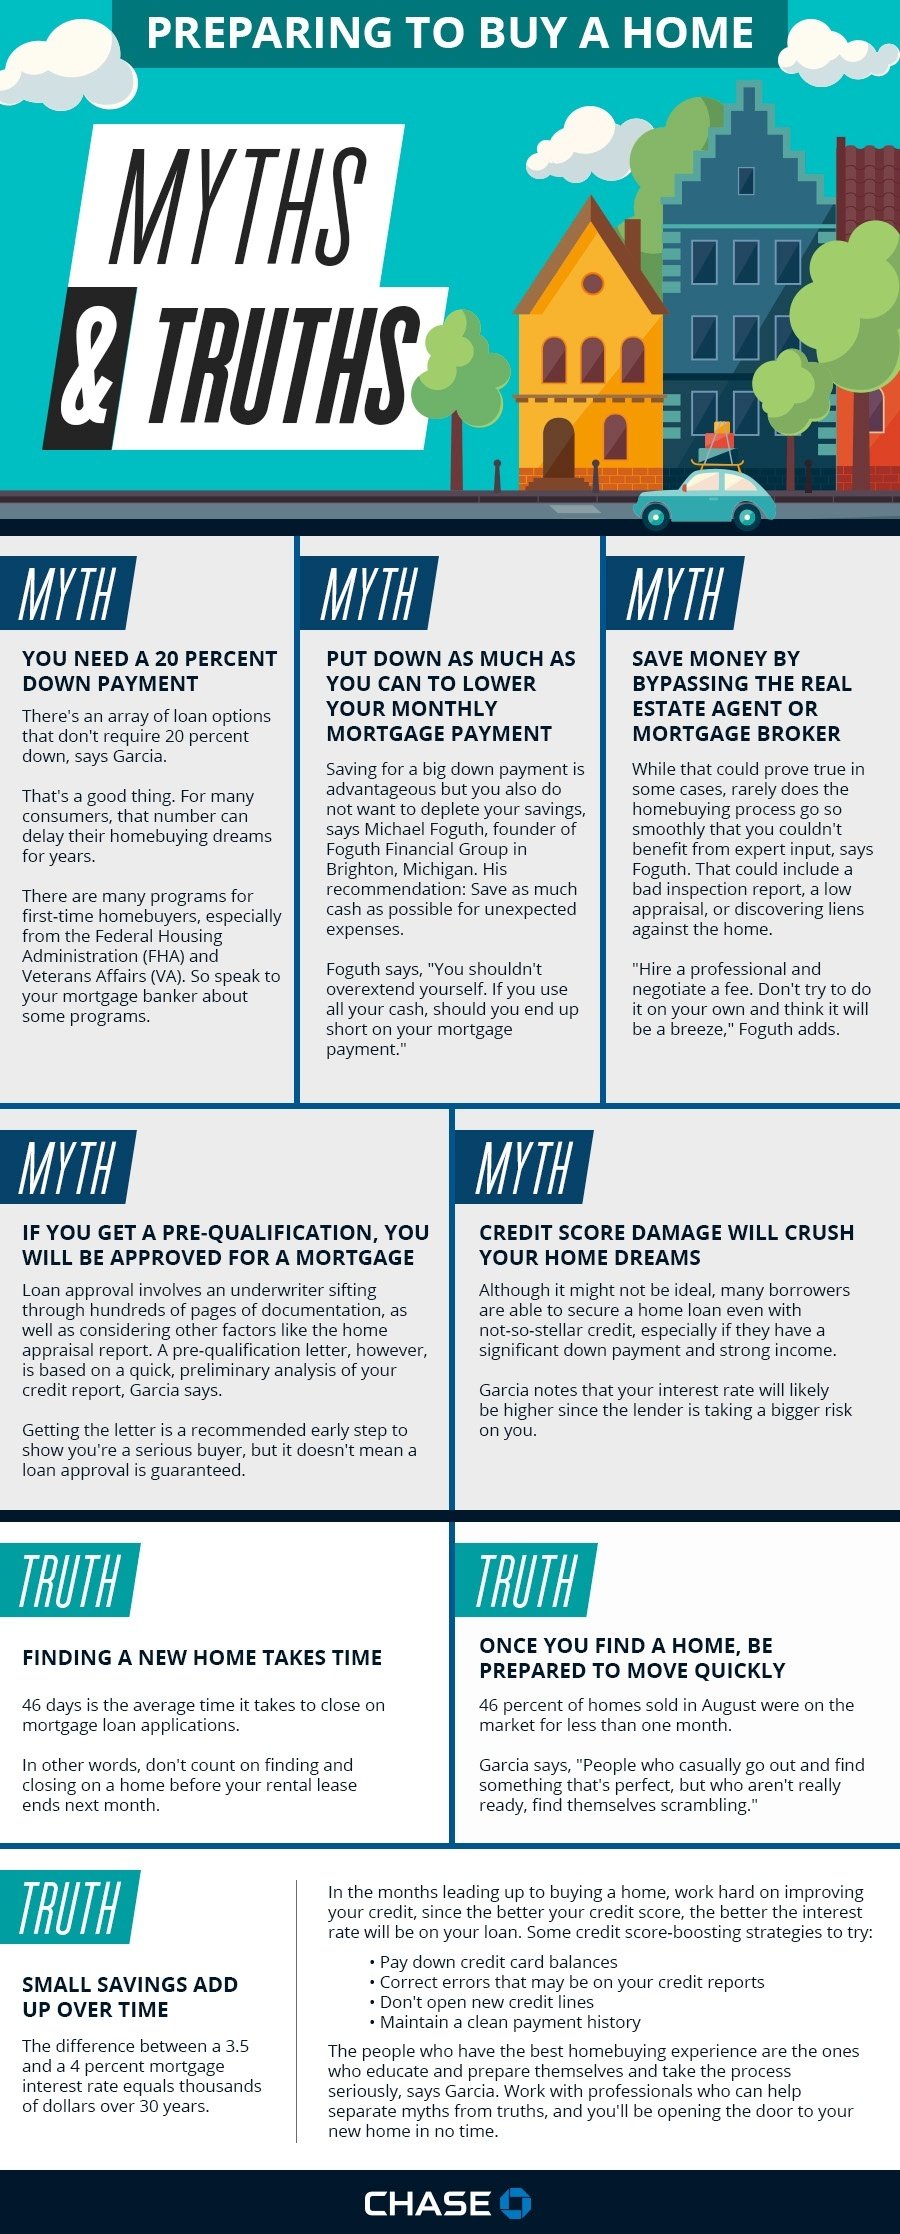 Home Buying Myths & Truths